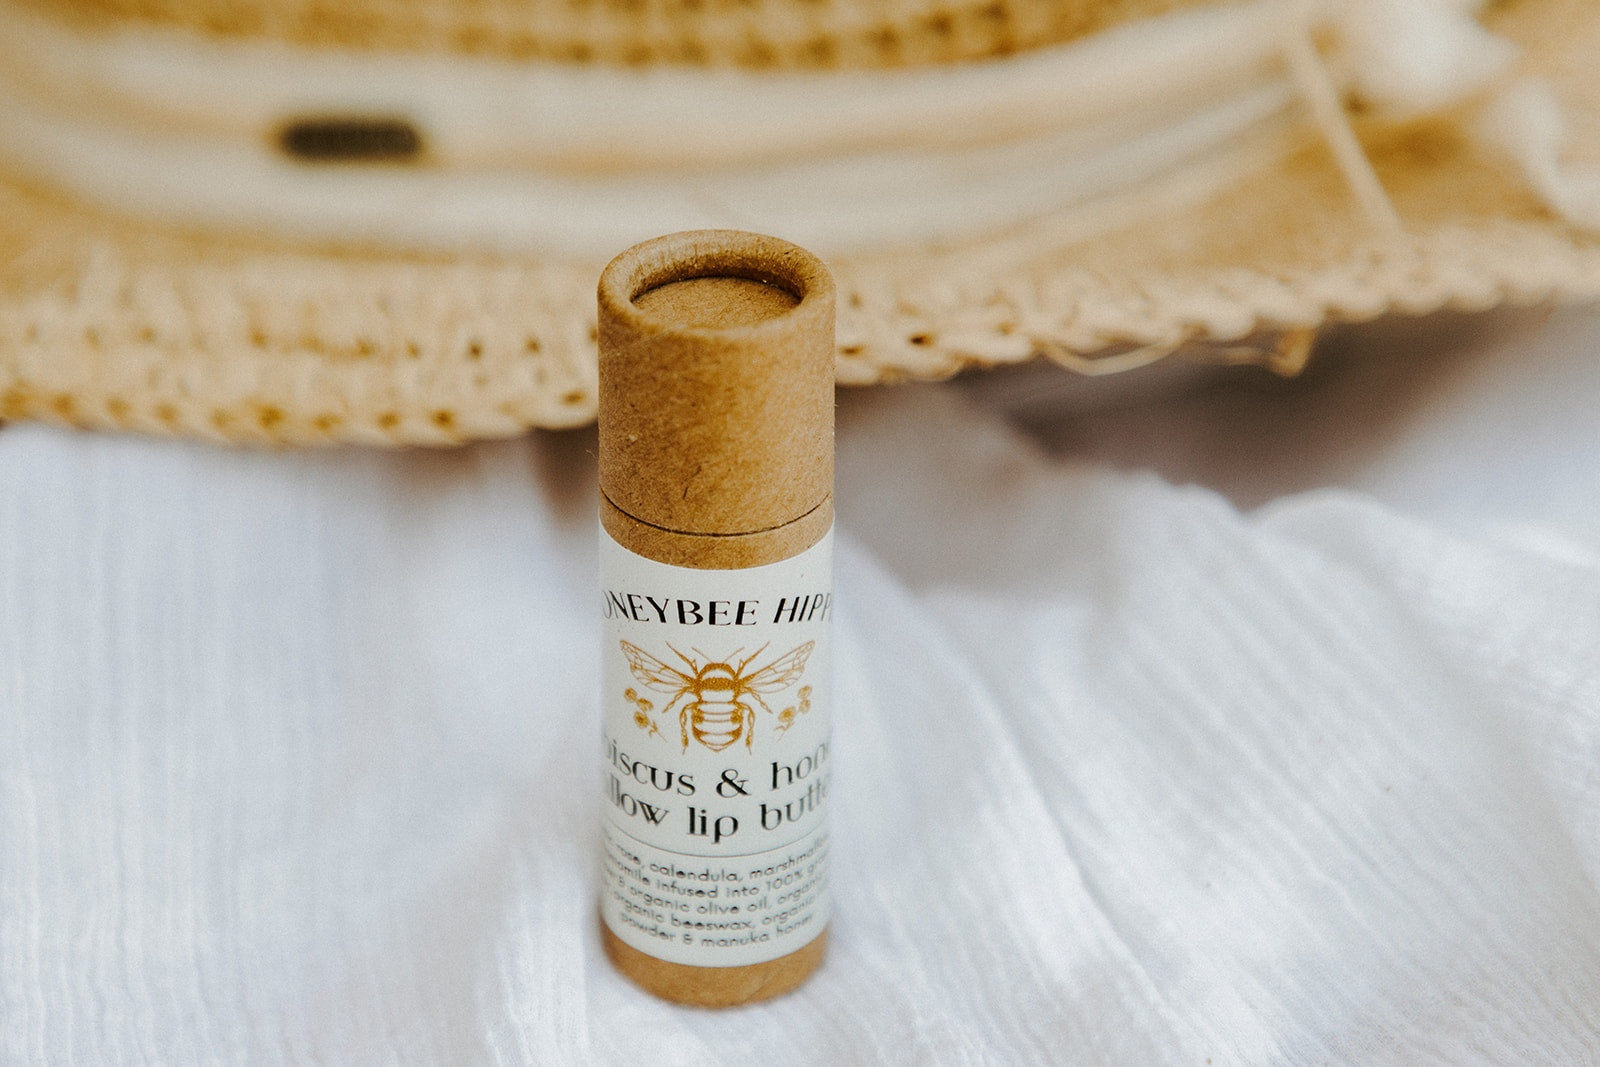 a closed tube of lip butter made by honeybee hippie with tallow and natural ingredients for soothing sunburn and healing skin on the lips